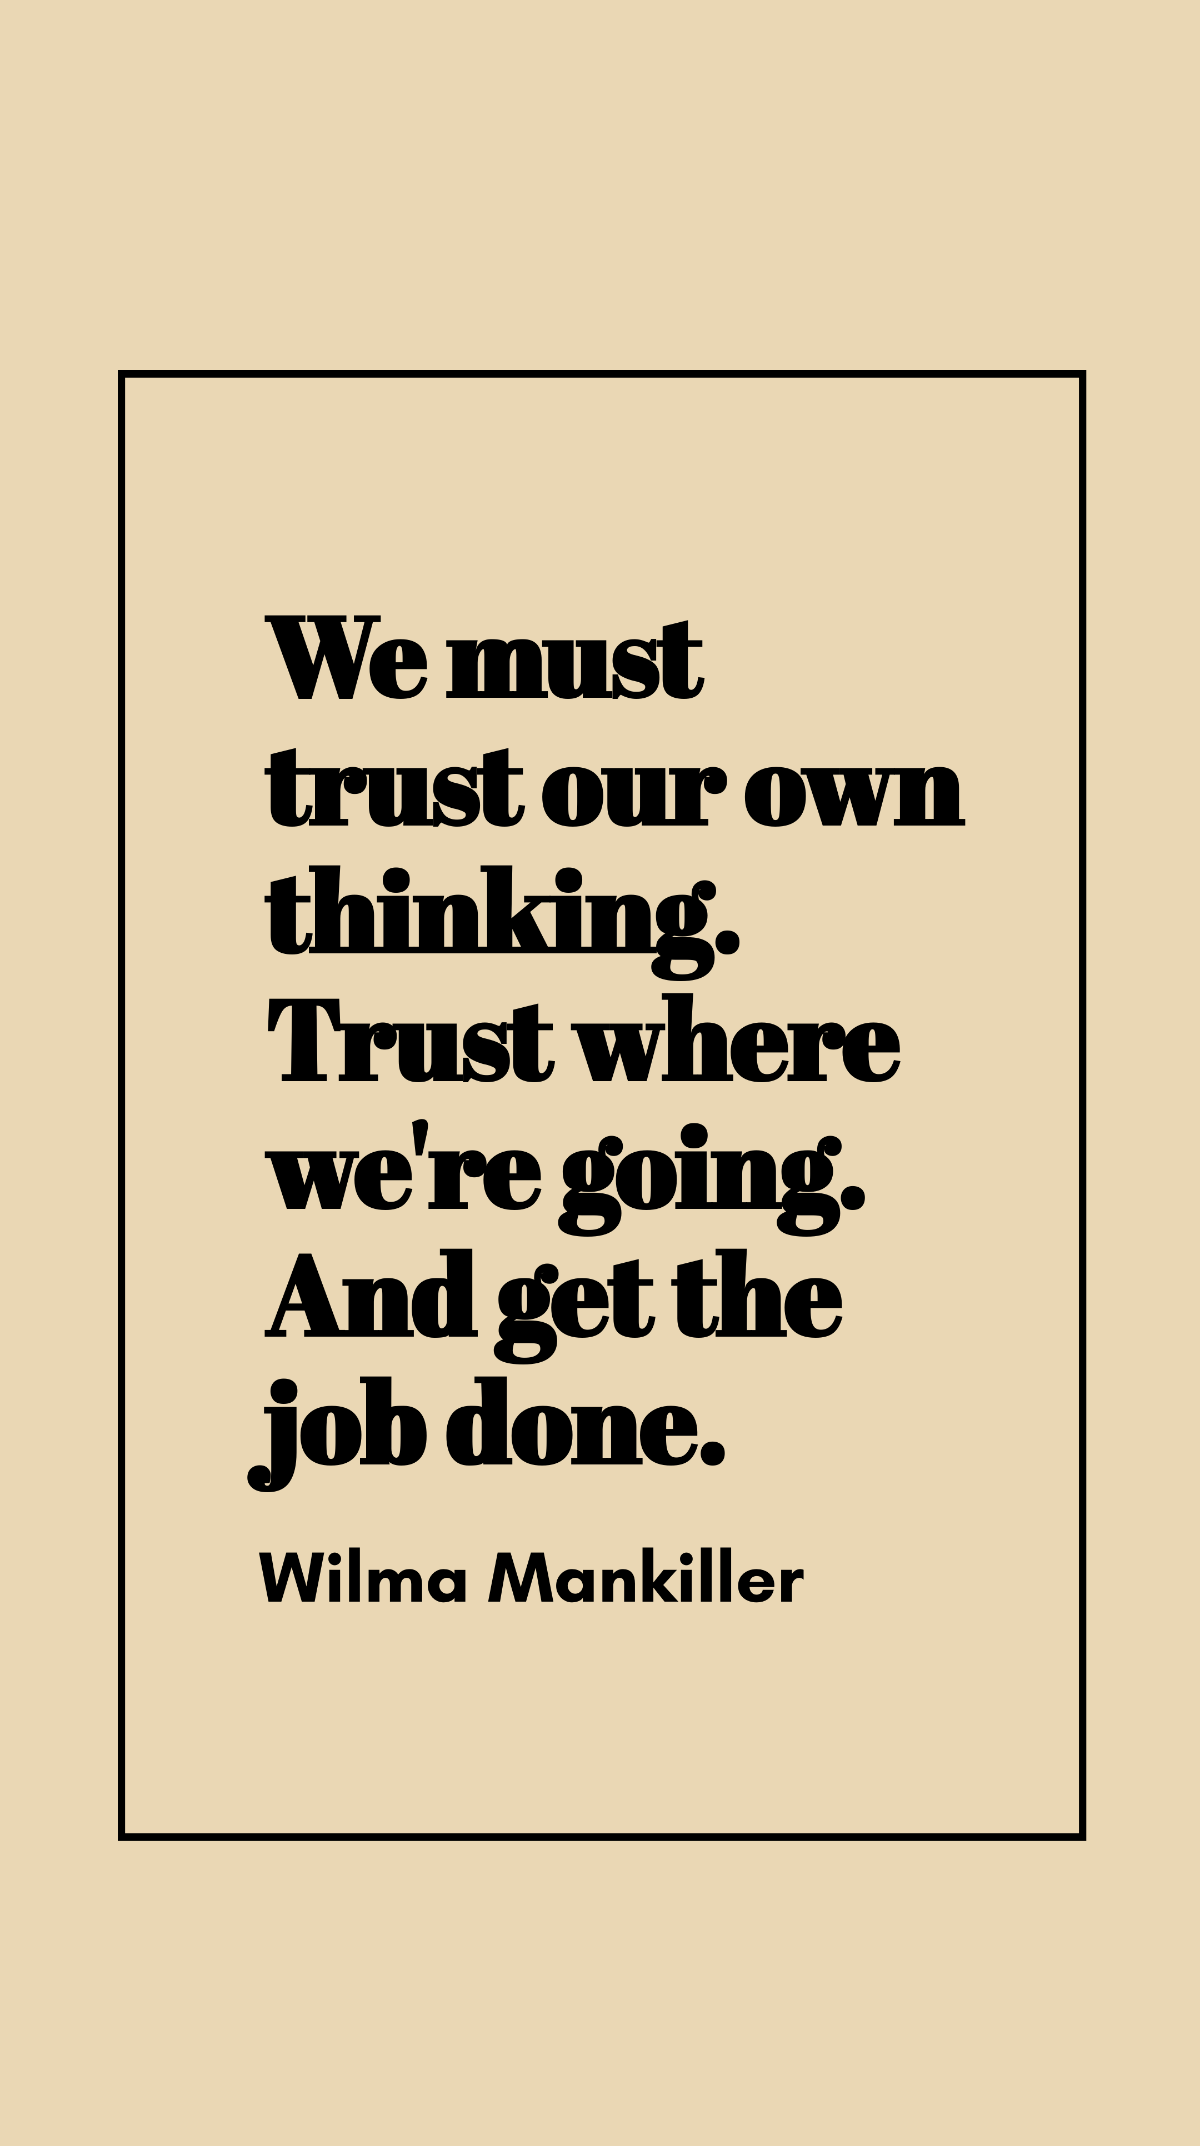 Free Wilma Mankiller - We must trust our own thinking. Trust where we're going. And get the job done. Template